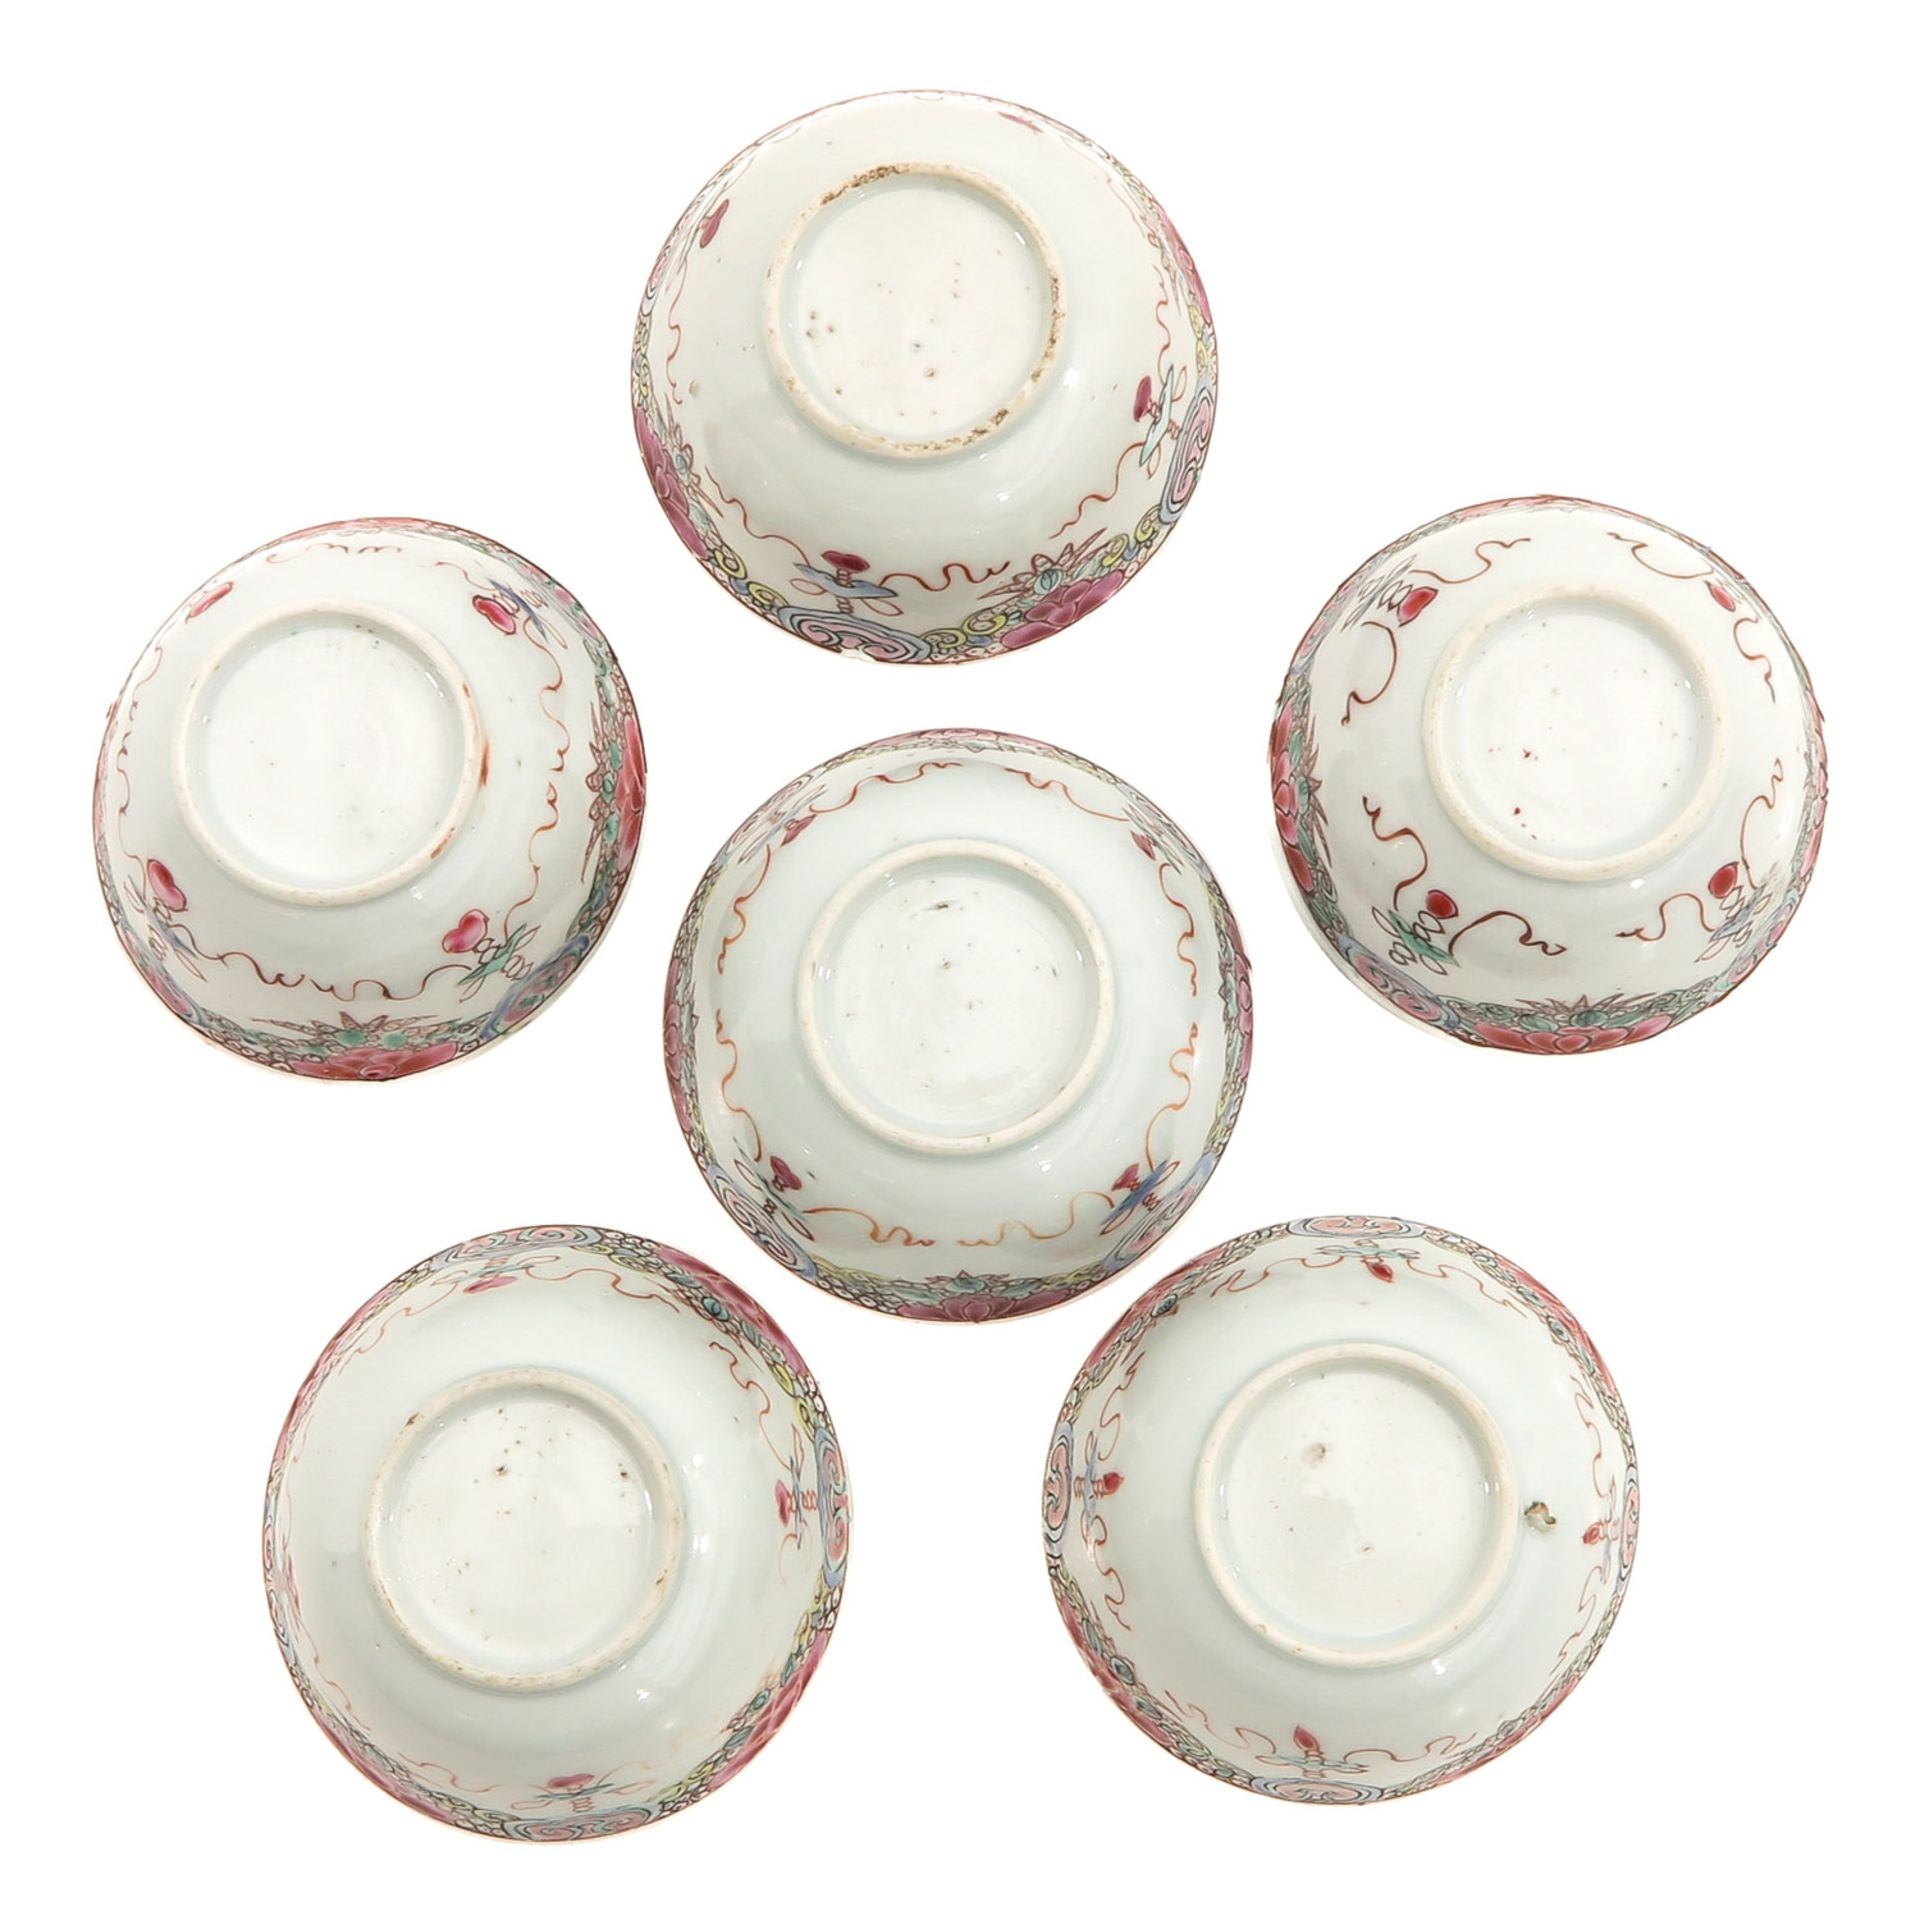 A Series of 6 Famille Rose Cups and Saucers - Image 6 of 10